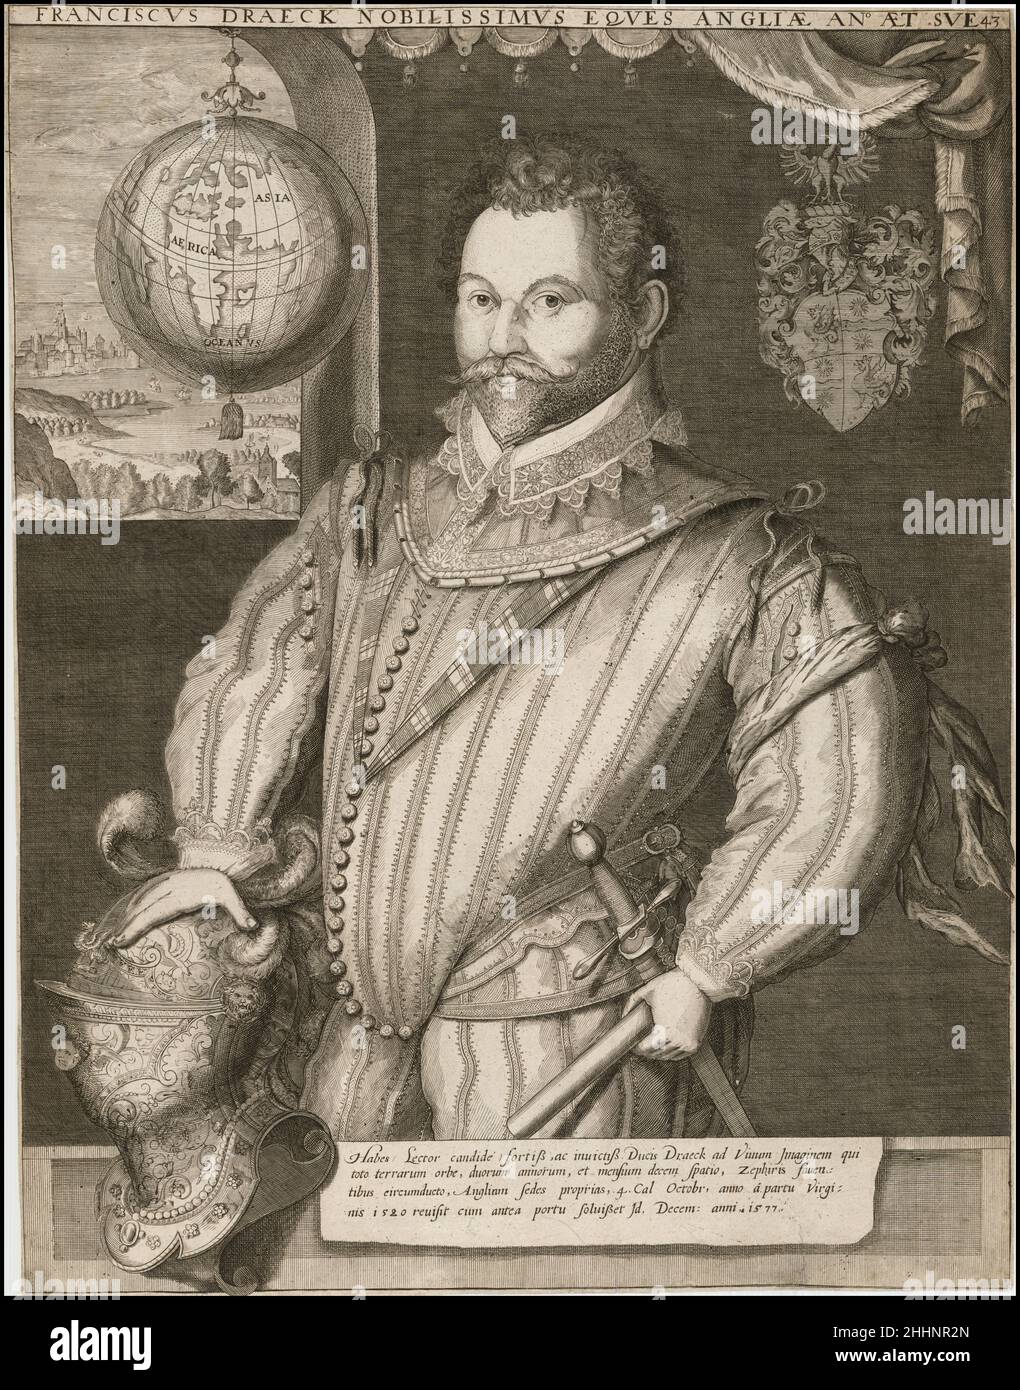 Sir Francis Drake (c.  1540 – 28 January 1596) was an English explorer, sea captain, privateer, slave trader, naval officer, and politician. Drake is best known for his circumnavigation of the world in a single expedition, from 1577 to 1580. This included his incursion into the Pacific Ocean, until then an area of exclusive Spanish interest, and his claim to New Albion for England, an area in what is now the U.S. state of California. His expedition inaugurated an era of conflict with the Spanish on the western coast of the Americas, an area that had previously been largely unexplored by Wester Stock Photo